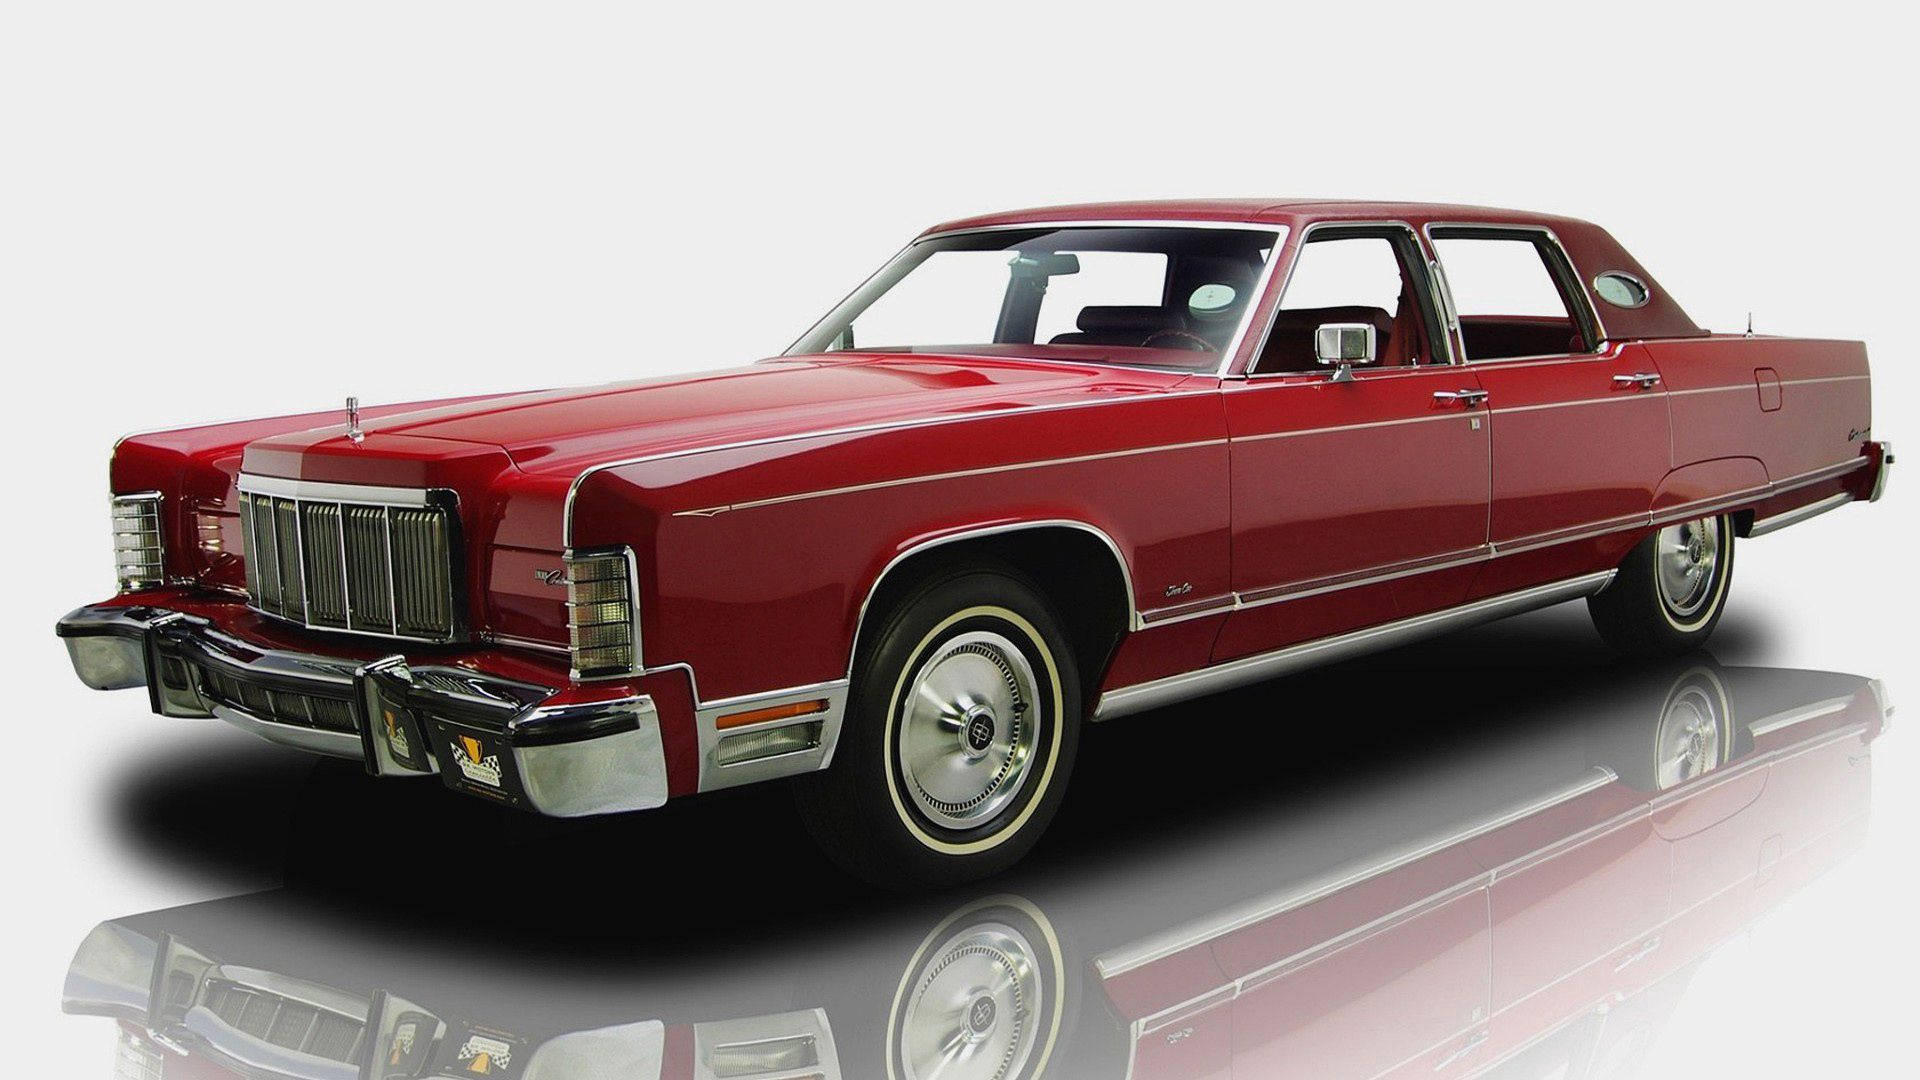 Lincoln Continental 1976 Luxury Car Wallpaper